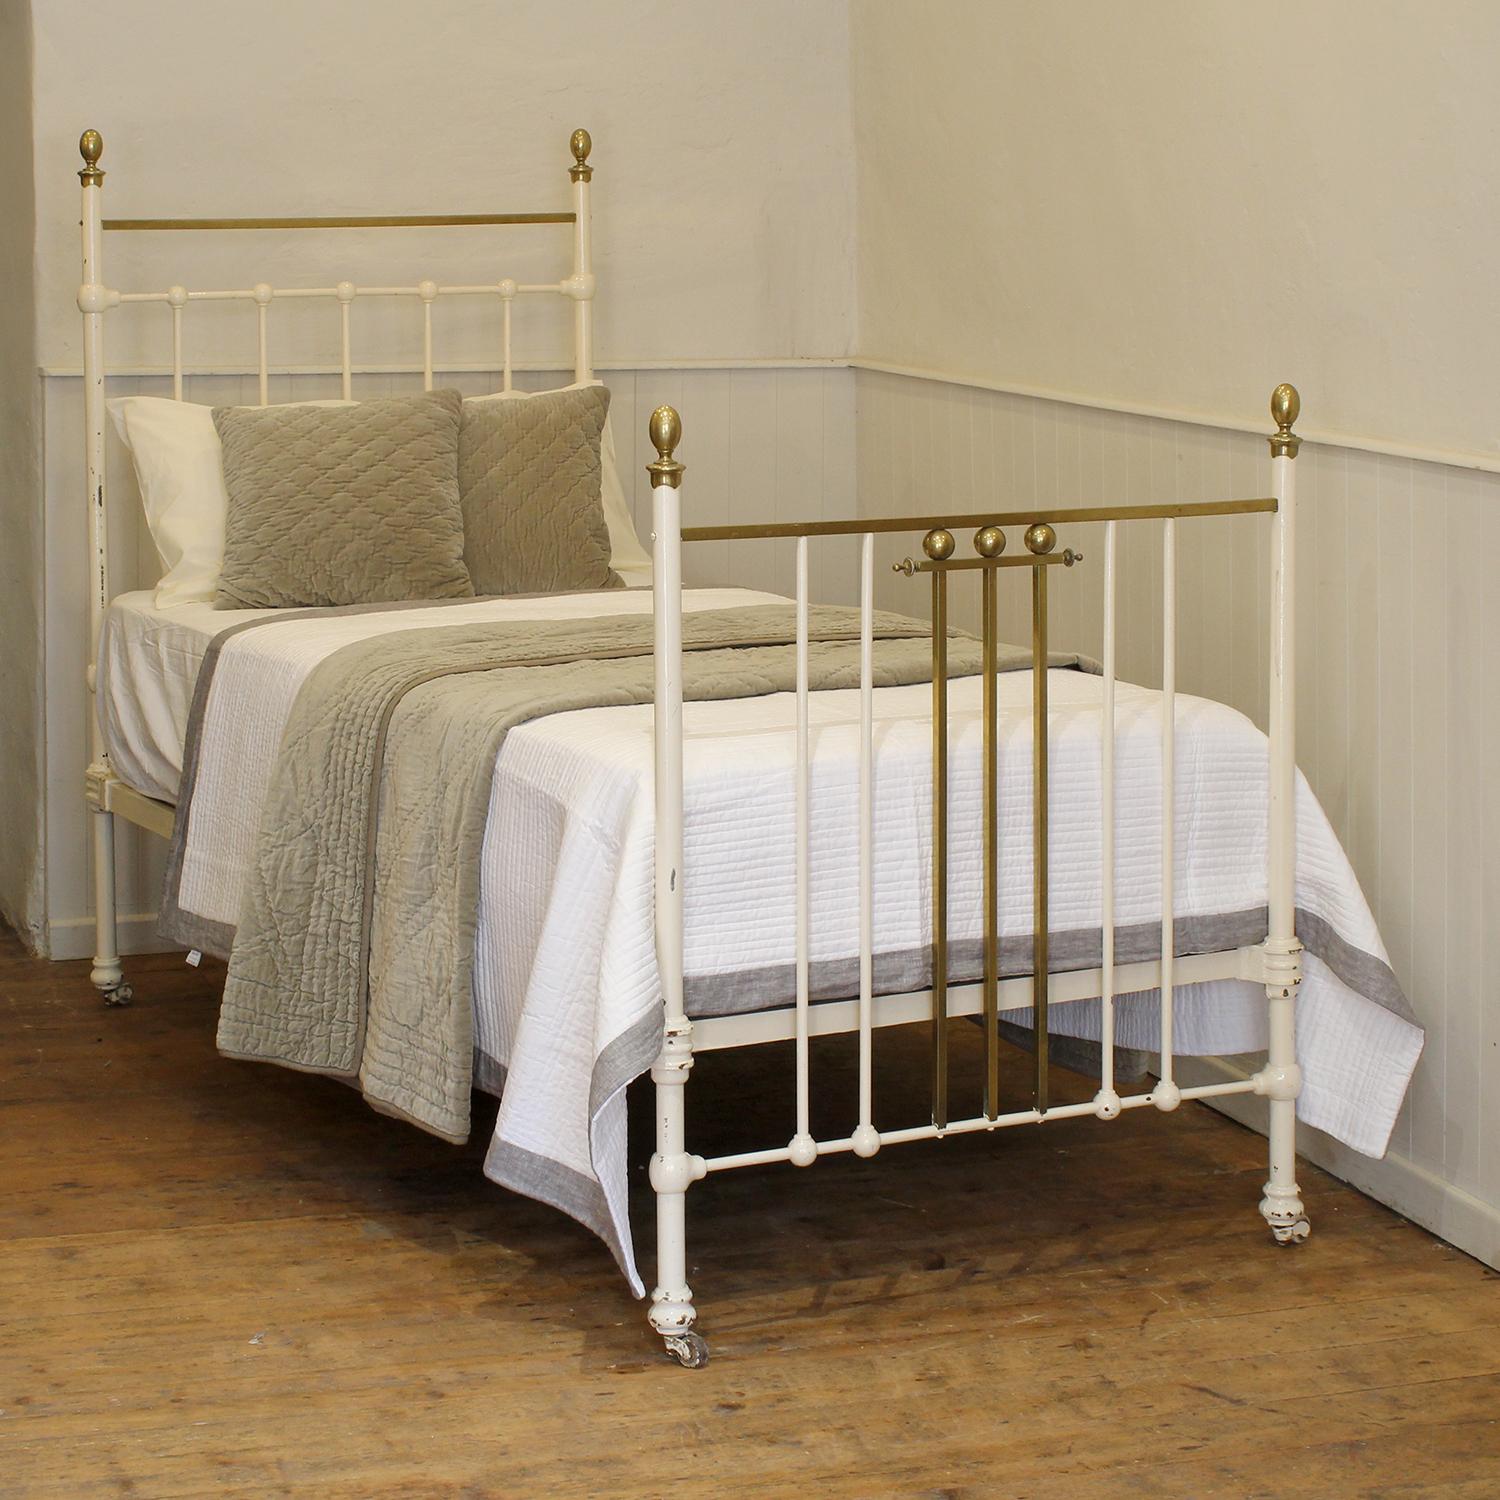 A traditional style Edwardian antique bed painted in white, with square section brass top rail, decorative features in the footboard, and oval brass knobs. 
The bed shows signs of its age with some marcks in the paintwork. We can leave these for